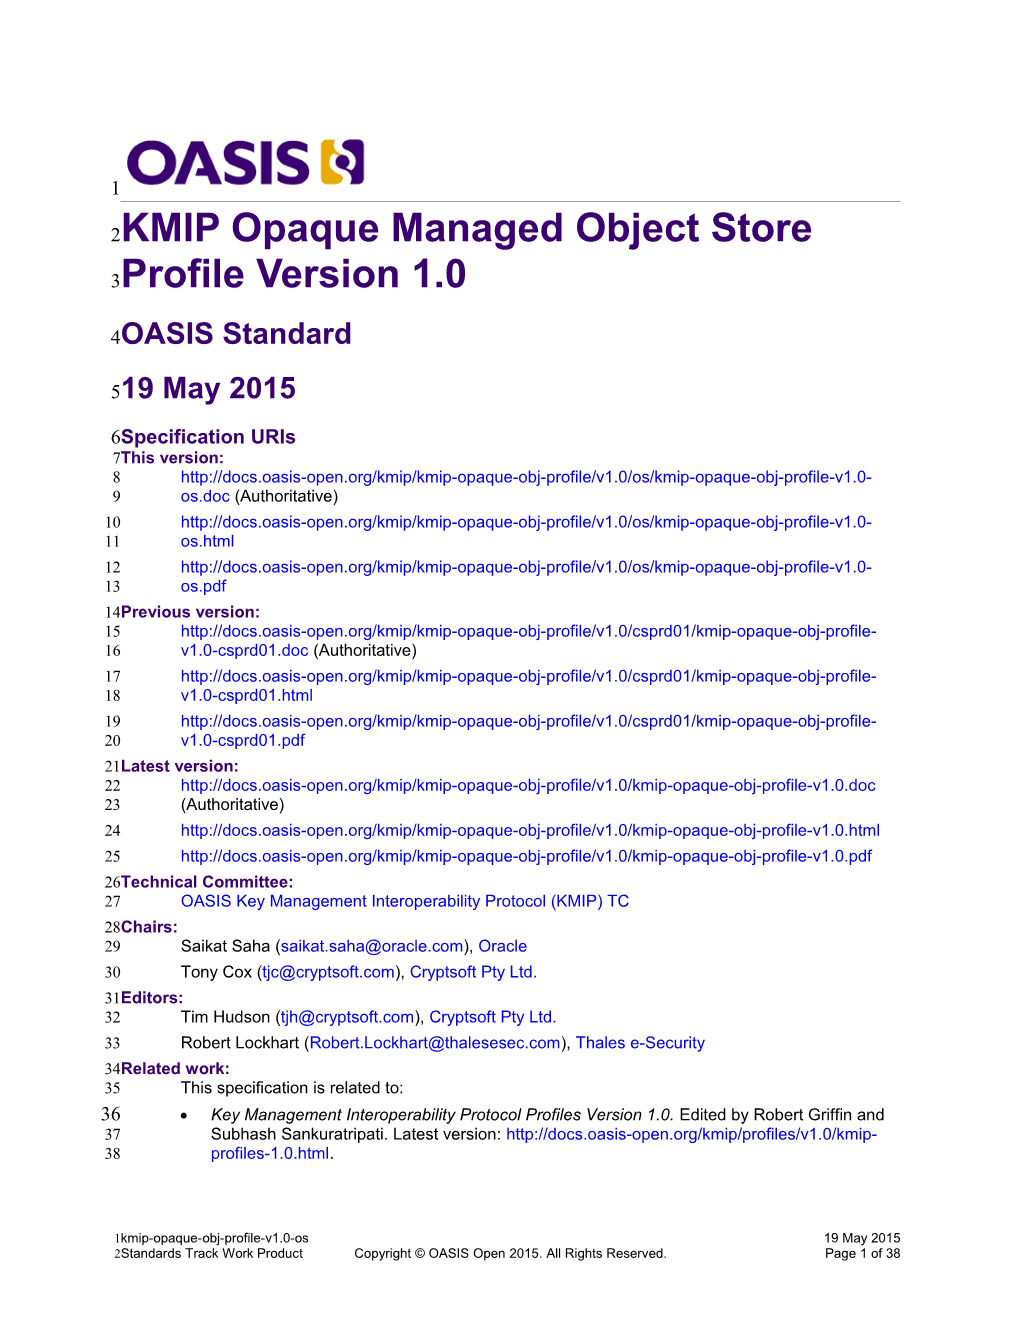 KMIP Opaque Managed Object Store Profile Version 1.0